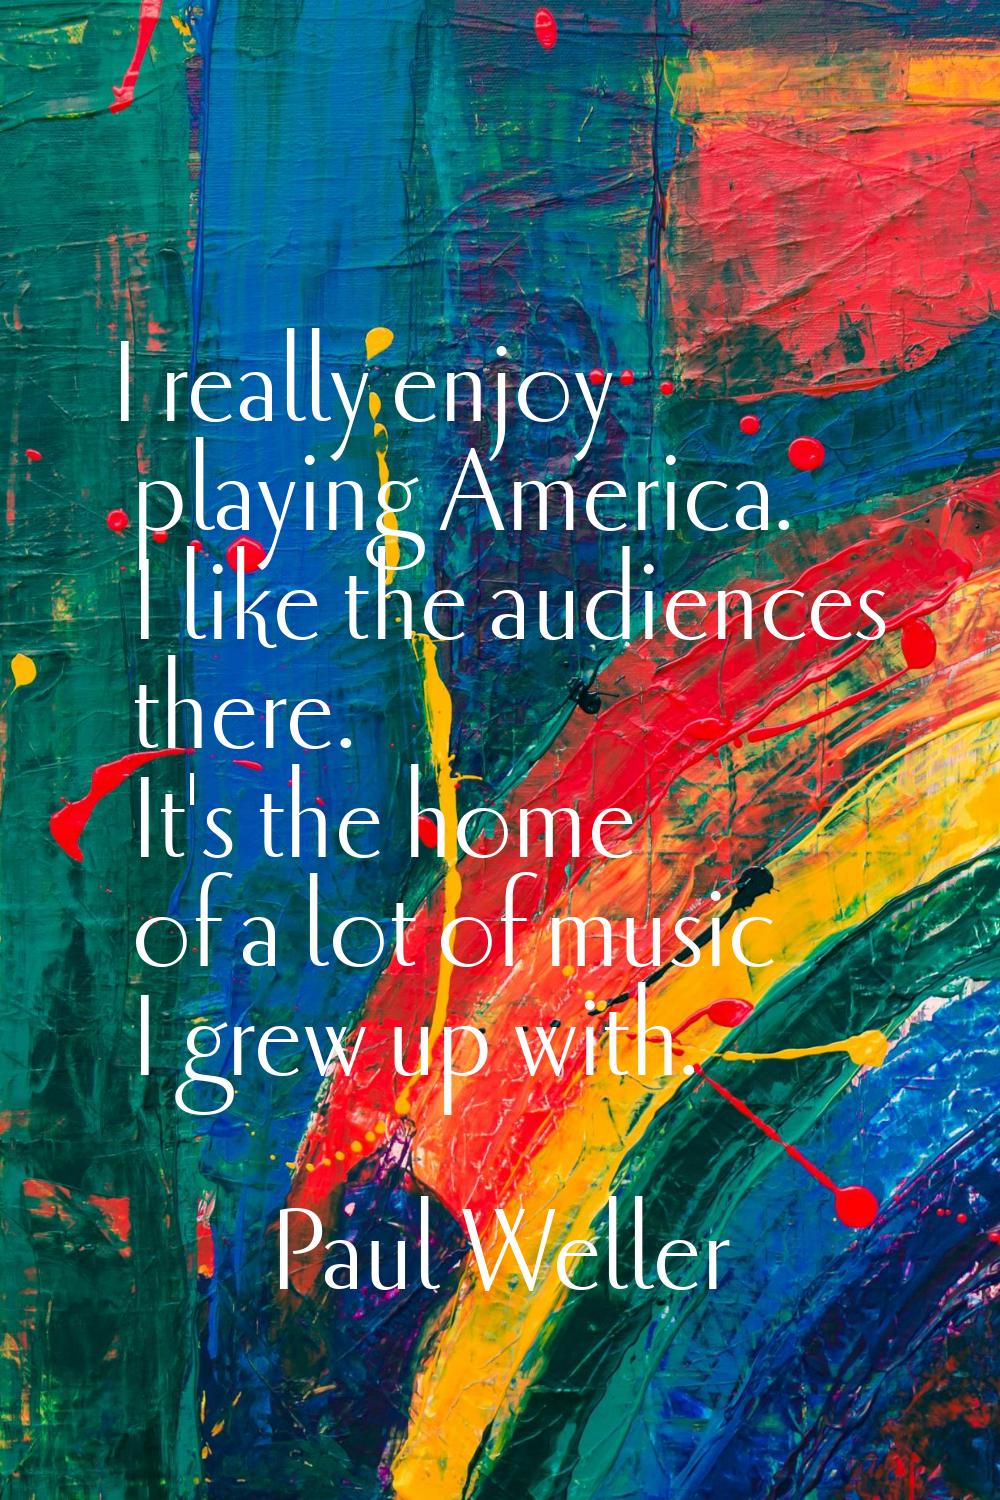 I really enjoy playing America. I like the audiences there. It's the home of a lot of music I grew 